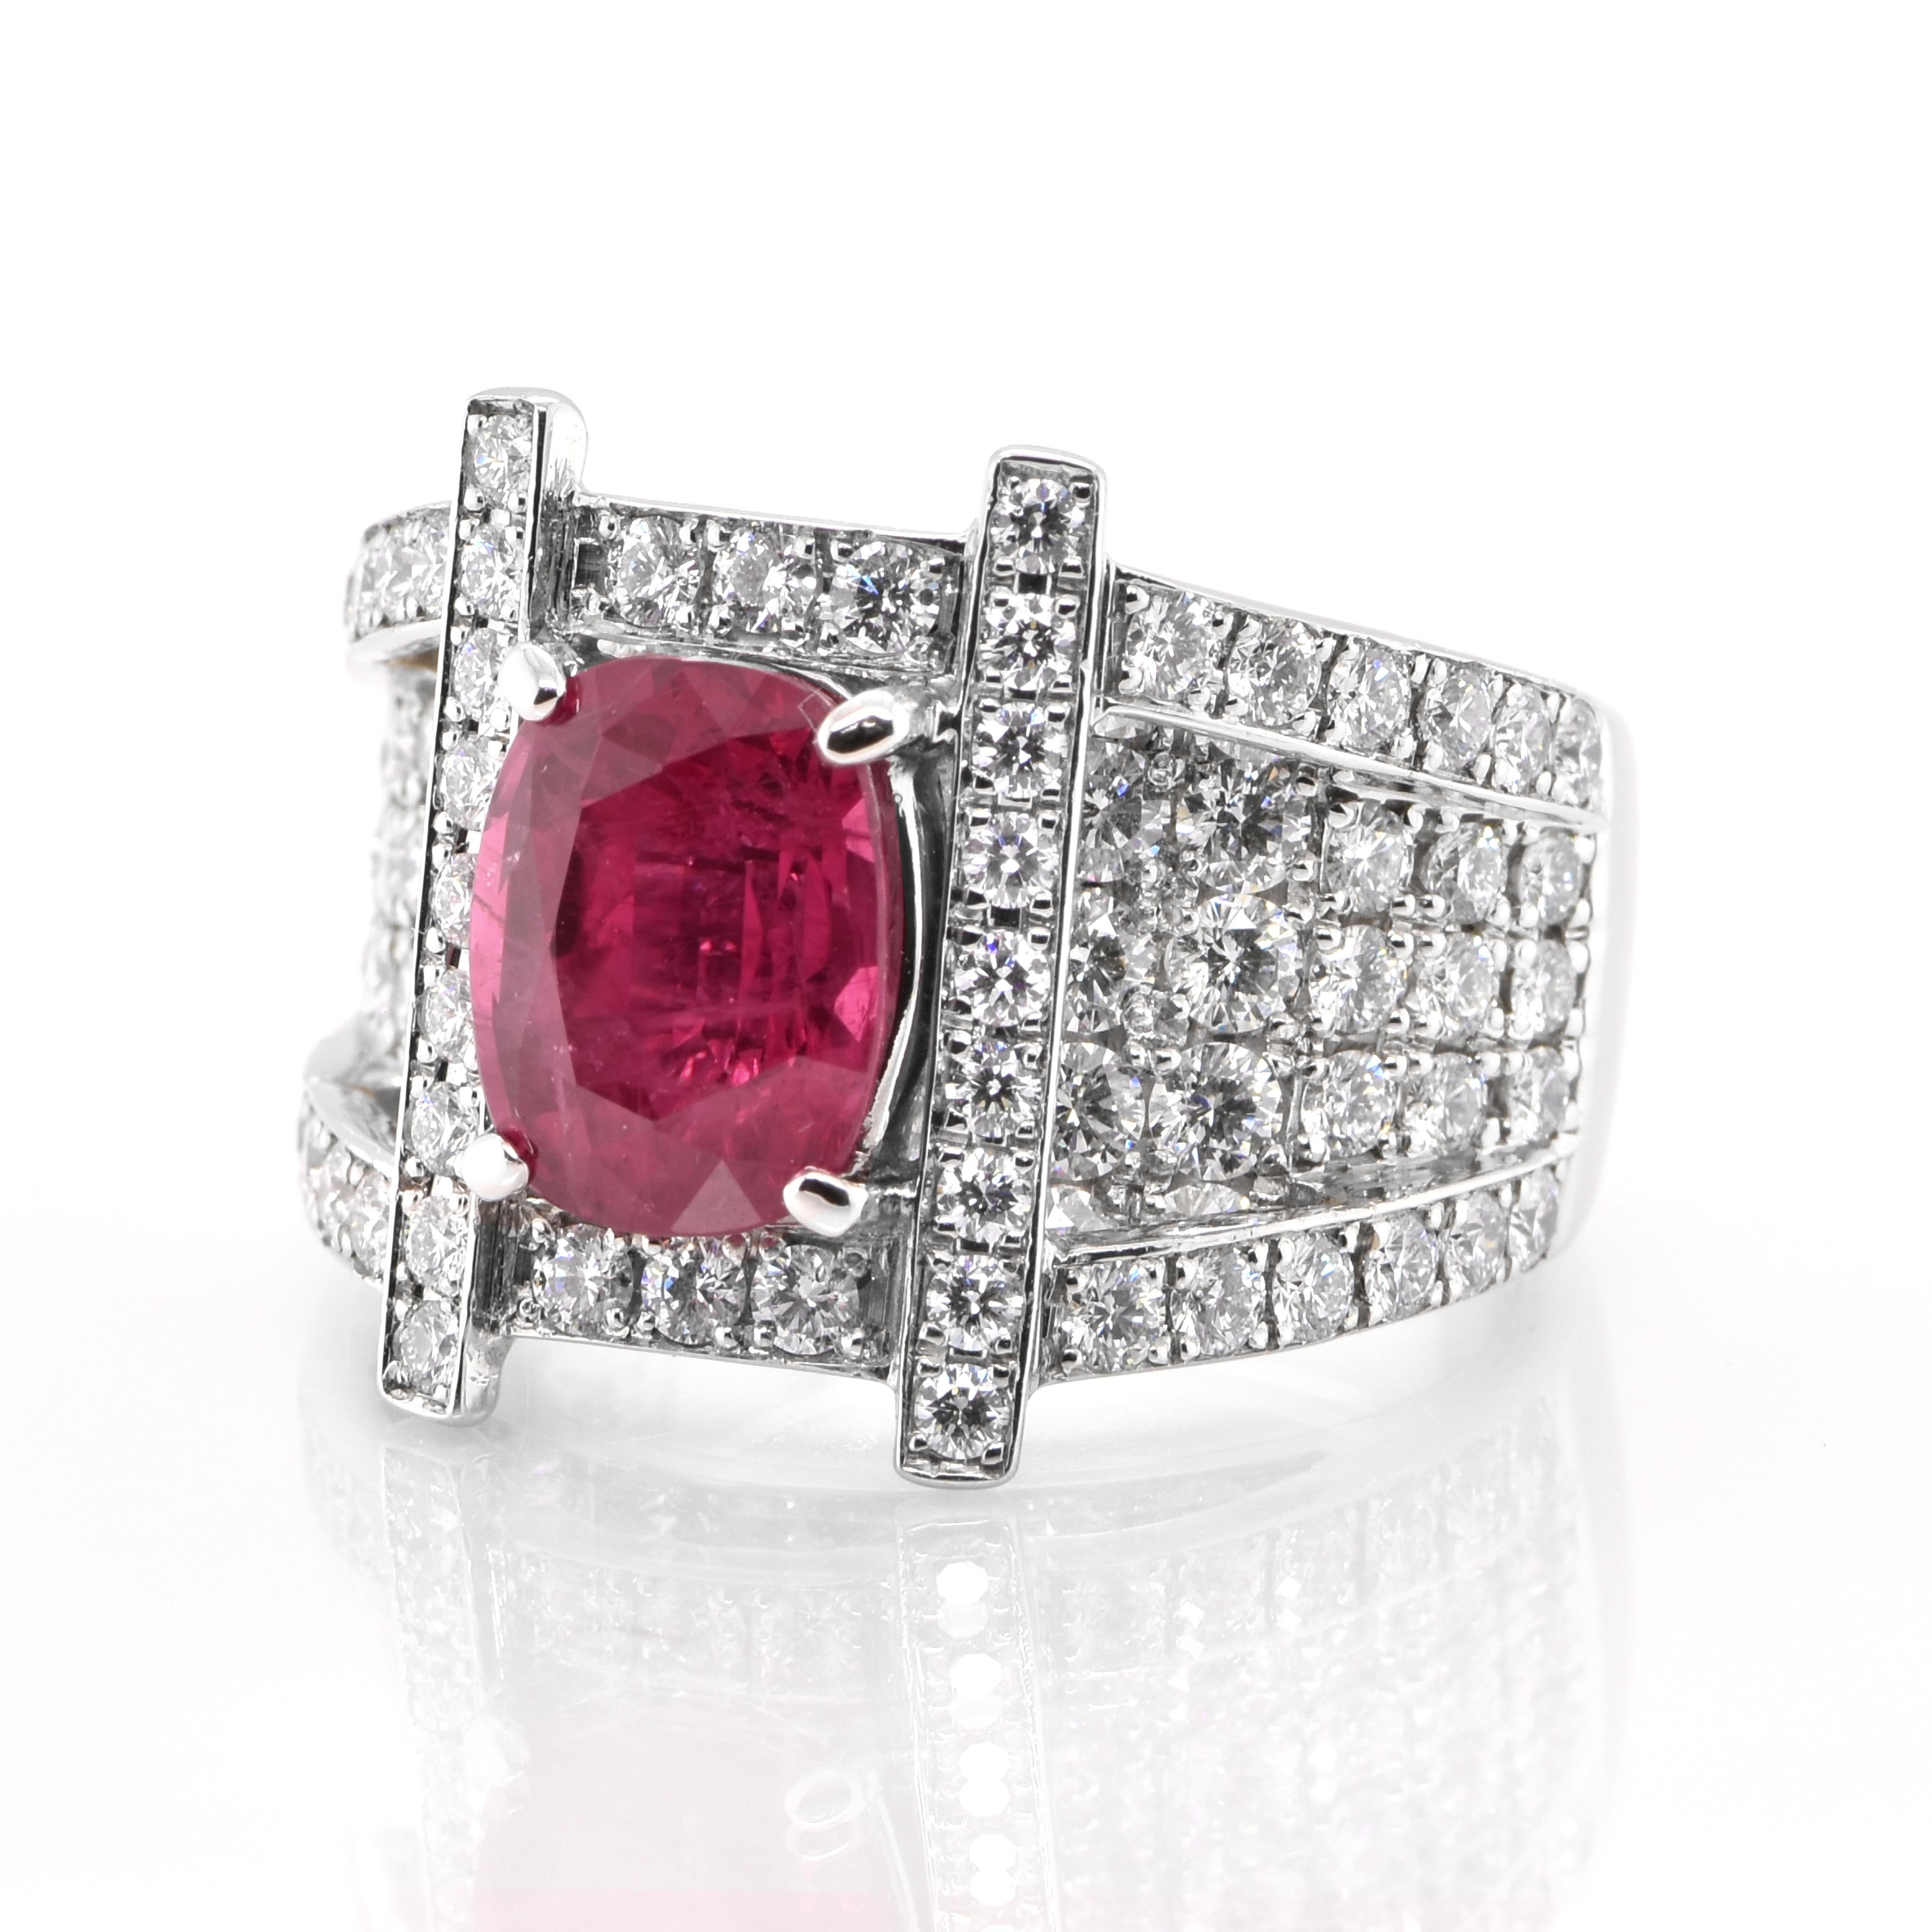 A beautiful Cocktail Ring featuring a GIA Certified 3.18 Carat, Natural, Thailand Mined Ruby and 2.514 Carats of Diamond Accents set in Platinum. The Ruby displays really exceptional luster and color. Rubies are referred to as 